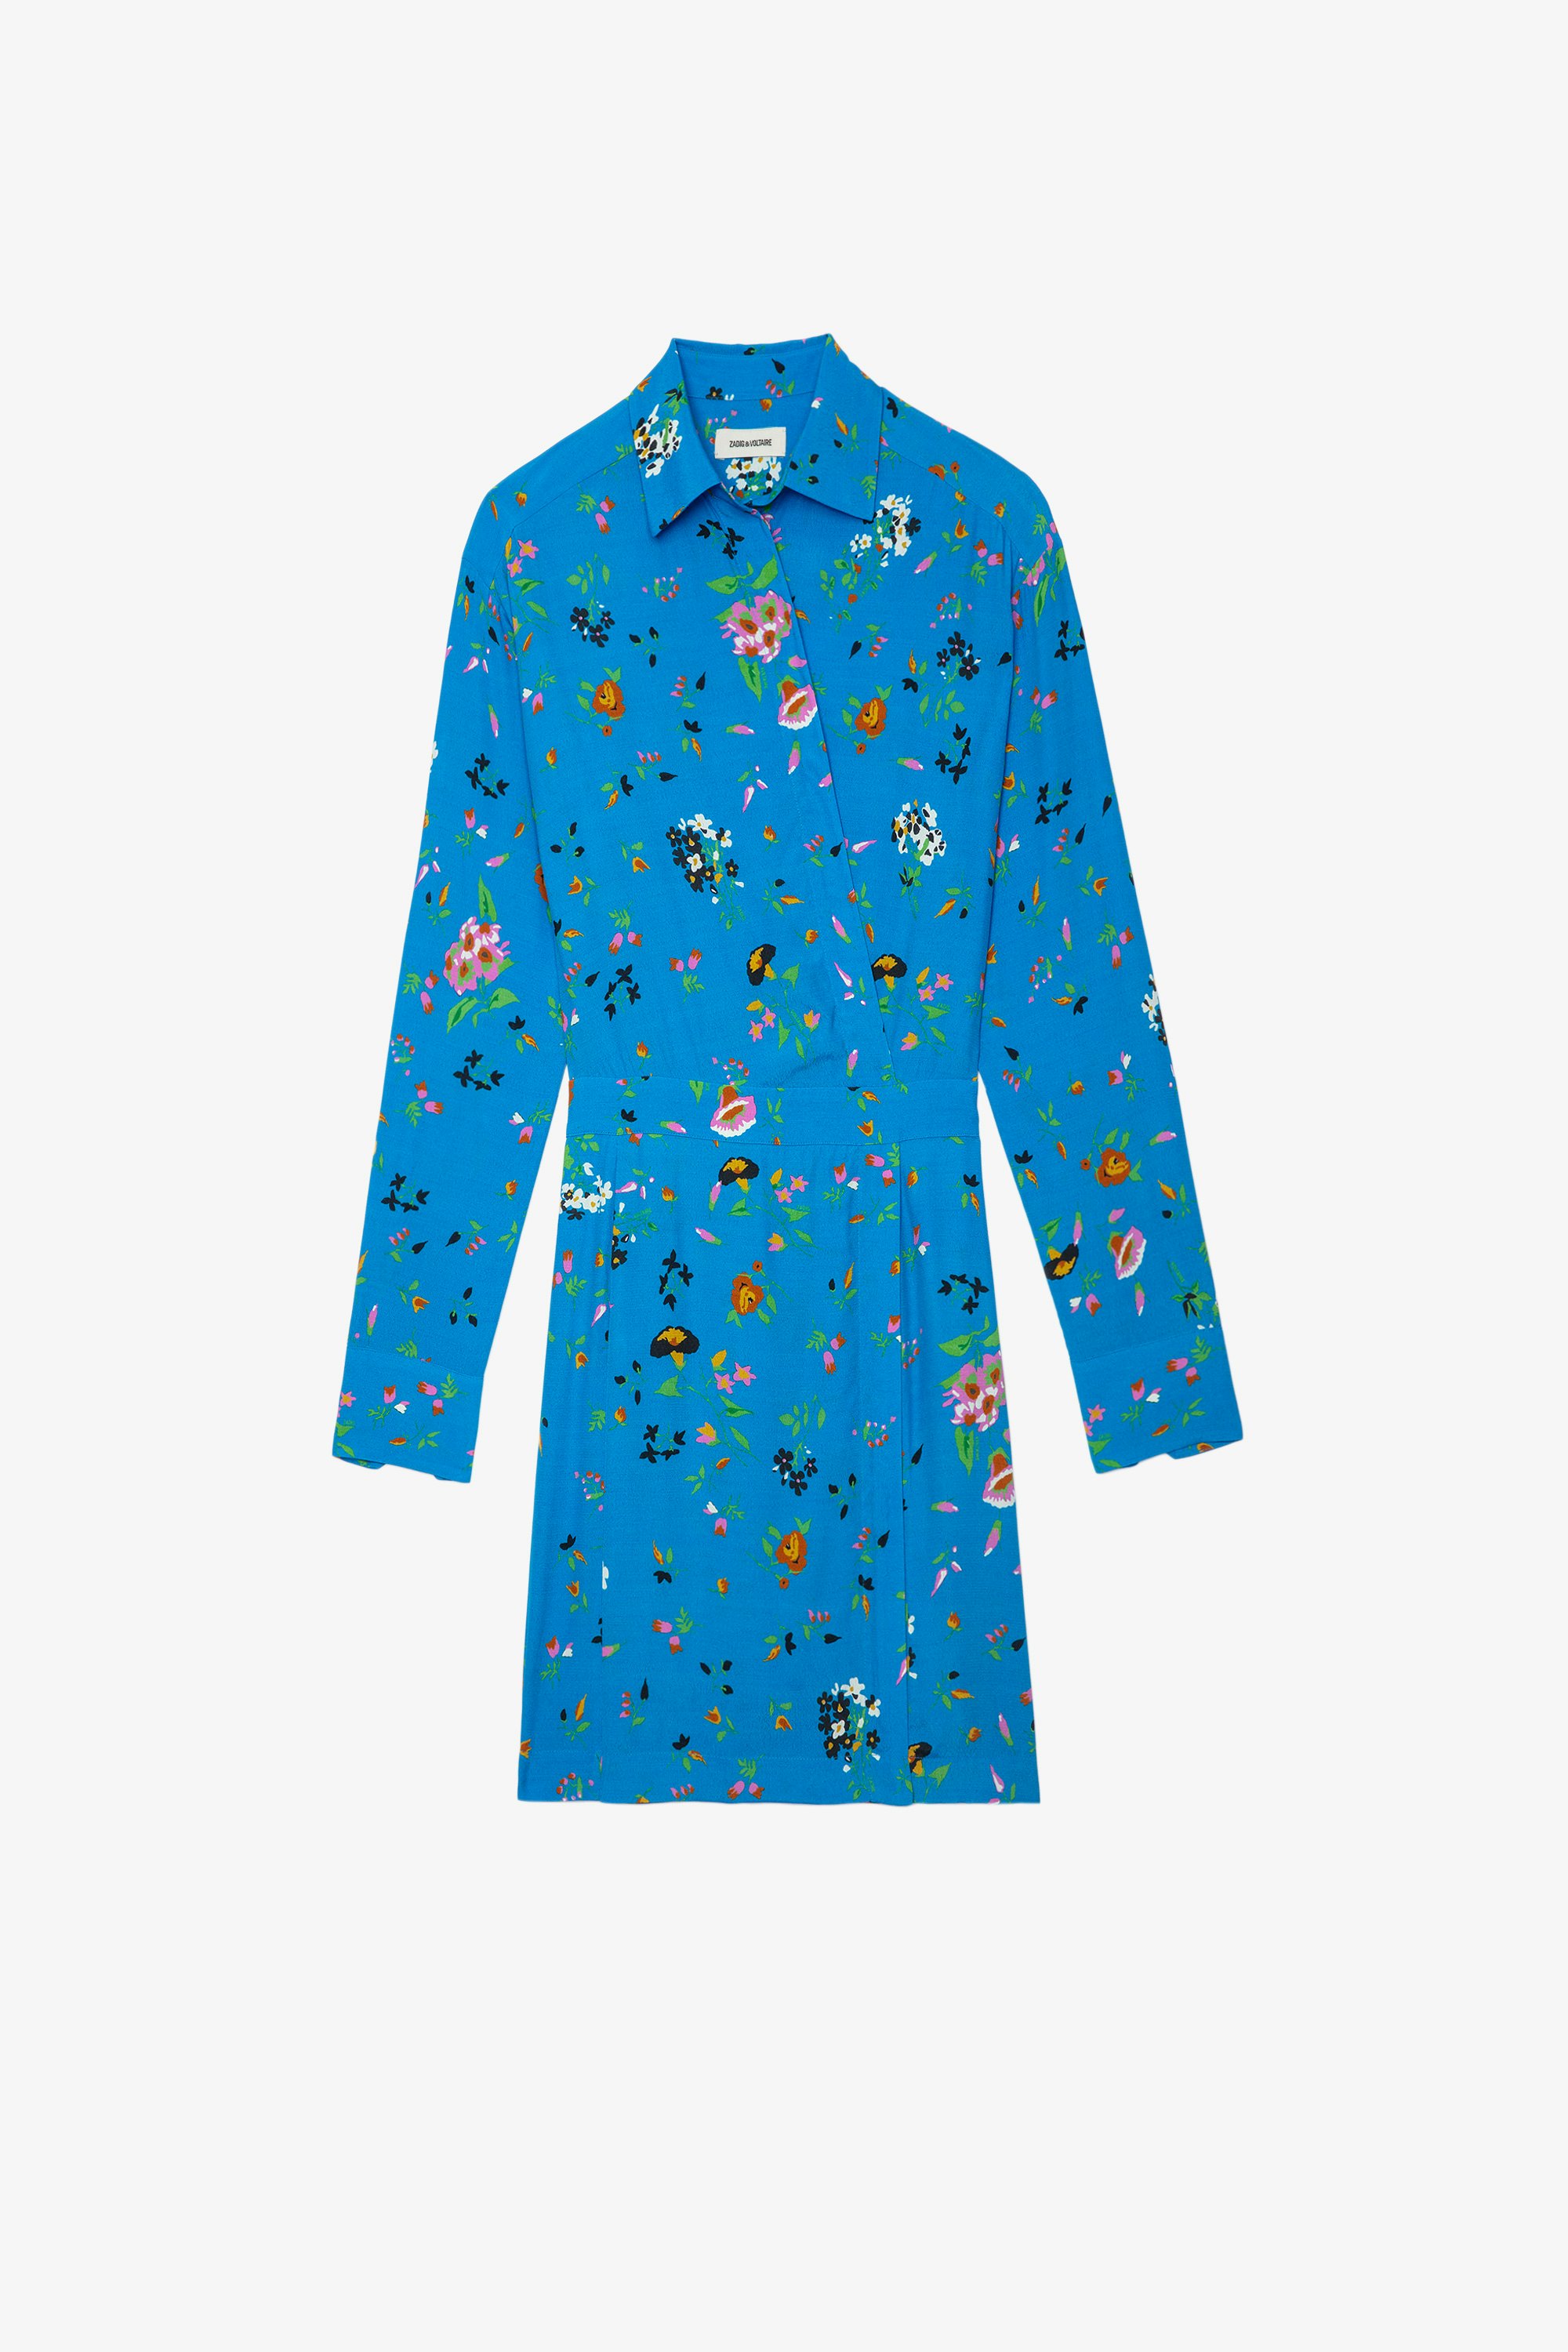 Ravy Dress Women’s short blue wrap dress with long sleeves and a floral print